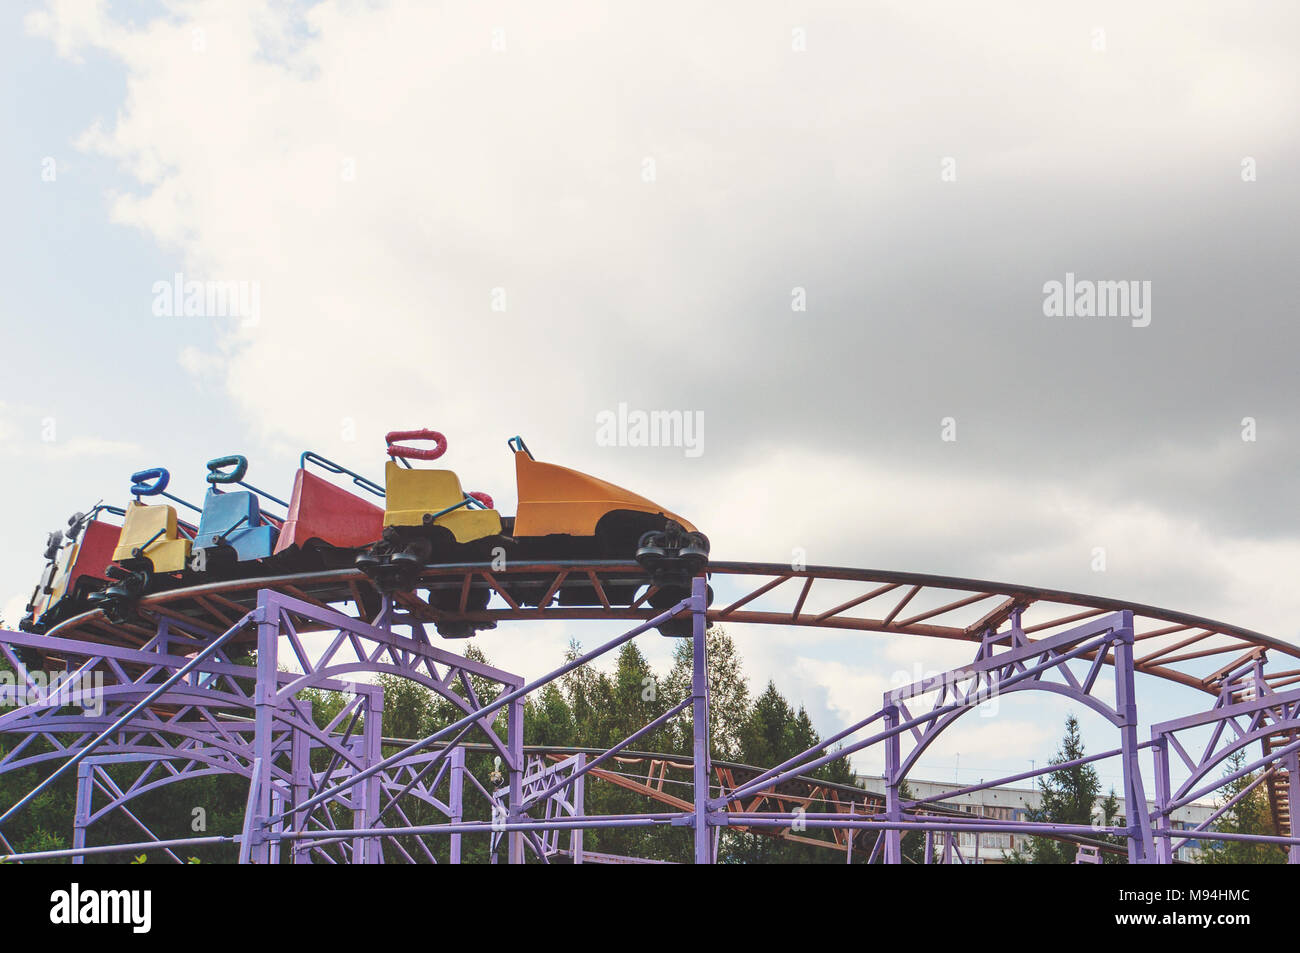 A roller coaster ride on the background of white sky. Toned retro photo. Stock Photo